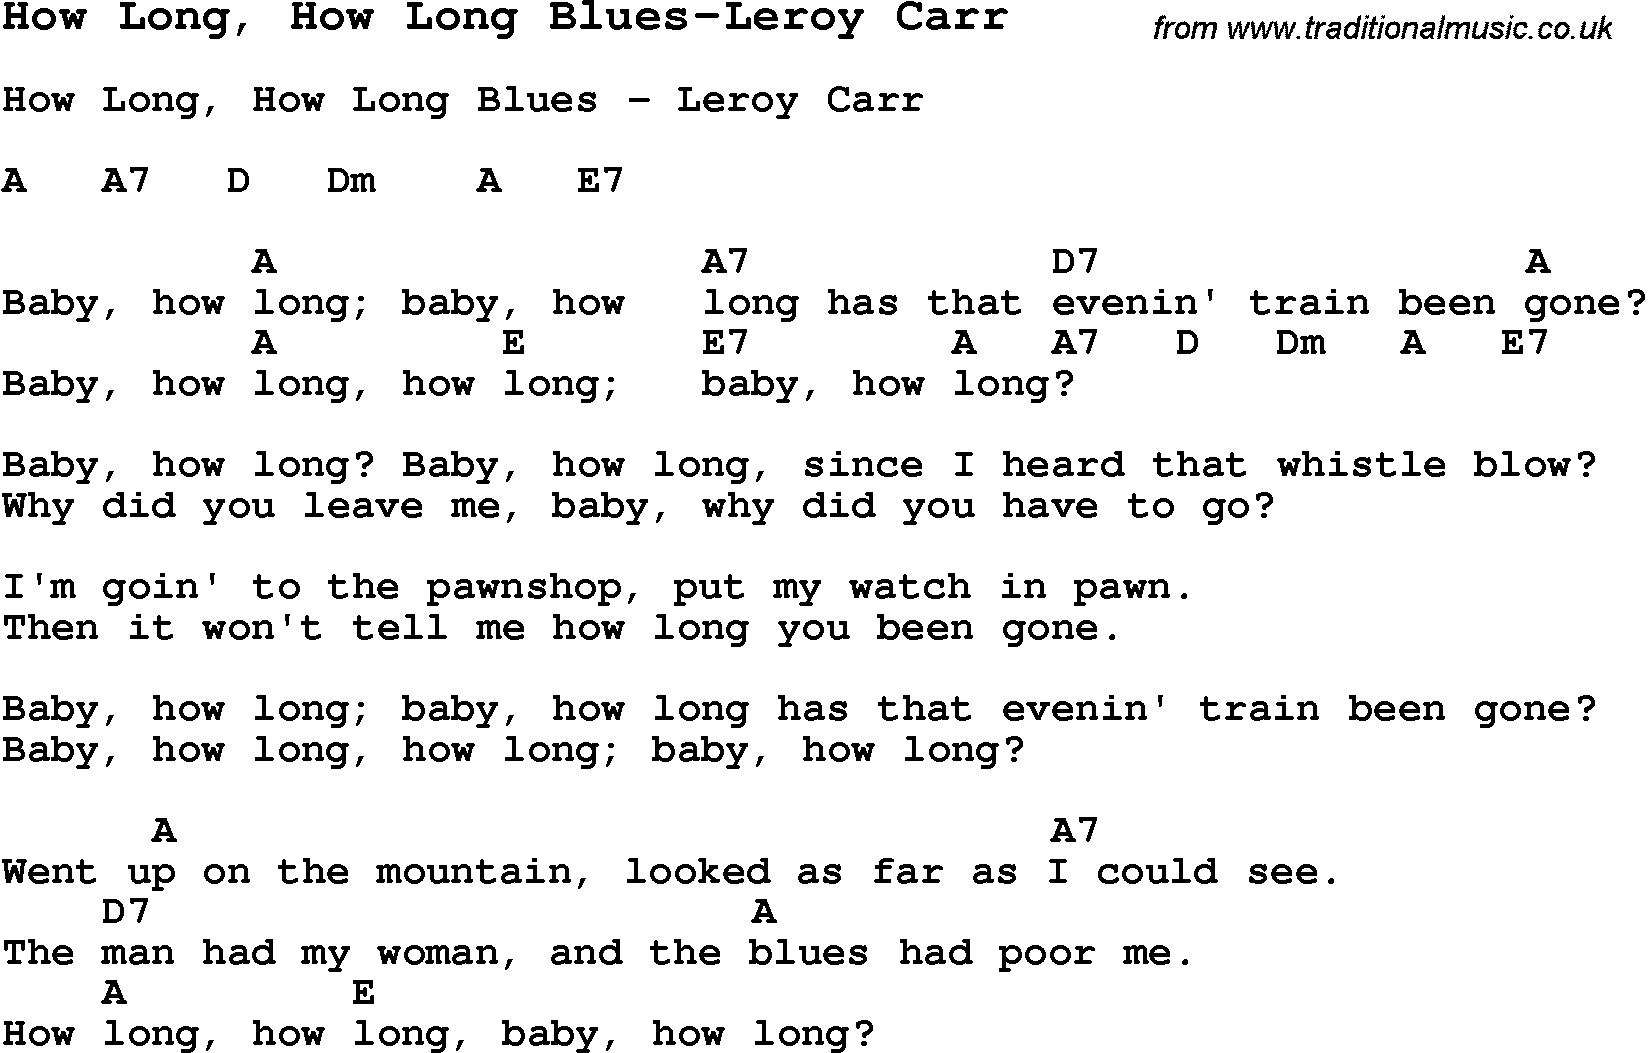 Blues Guitar Song, lyrics, chords, tablature, playing hints for How Long, How Long Blues-Leroy Carr